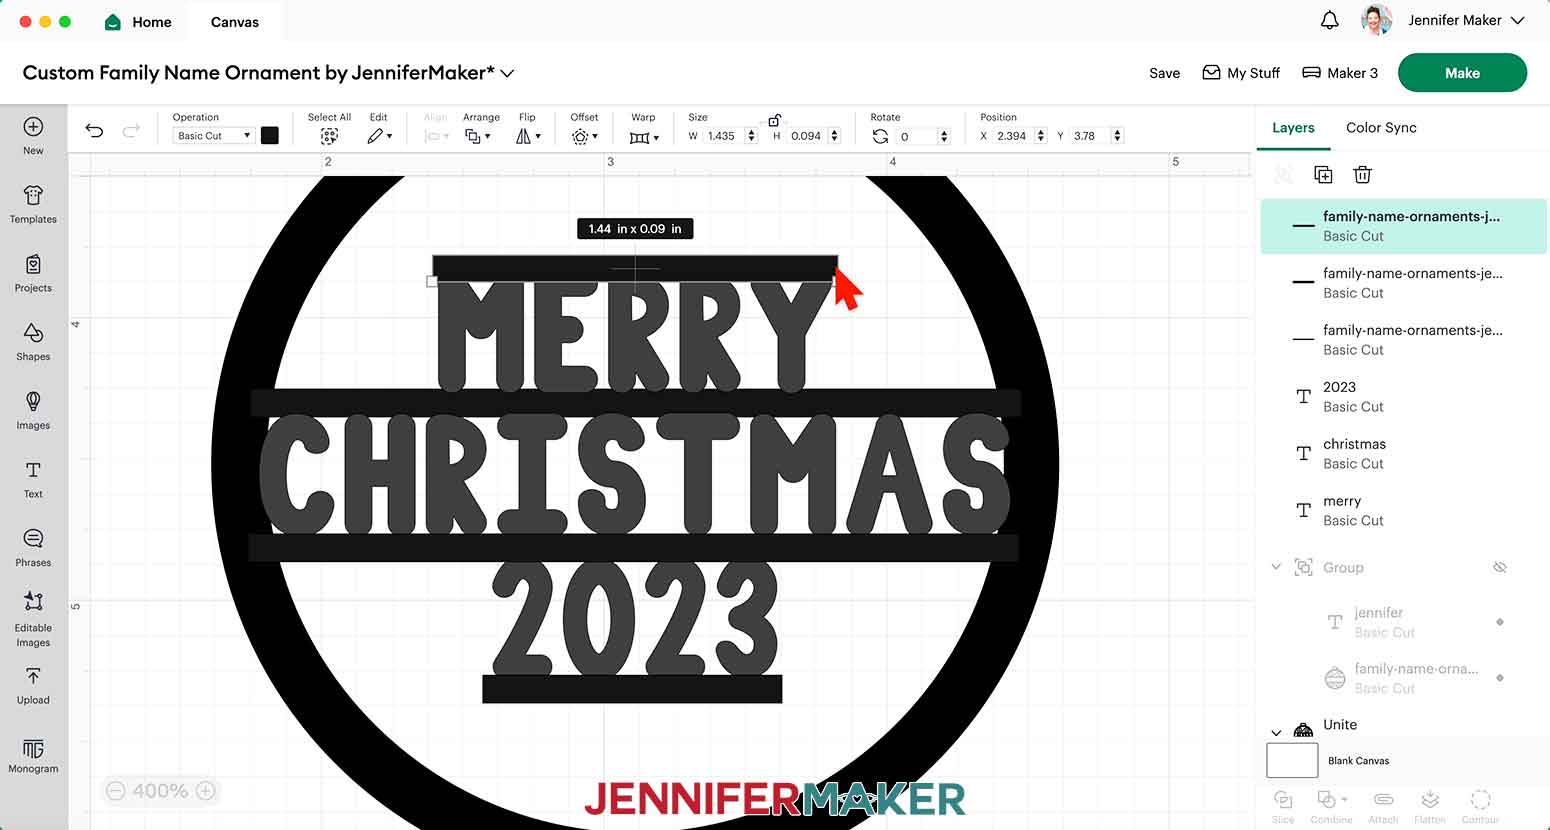 All horizontal lines attached to the top and bottom of the ornament words.